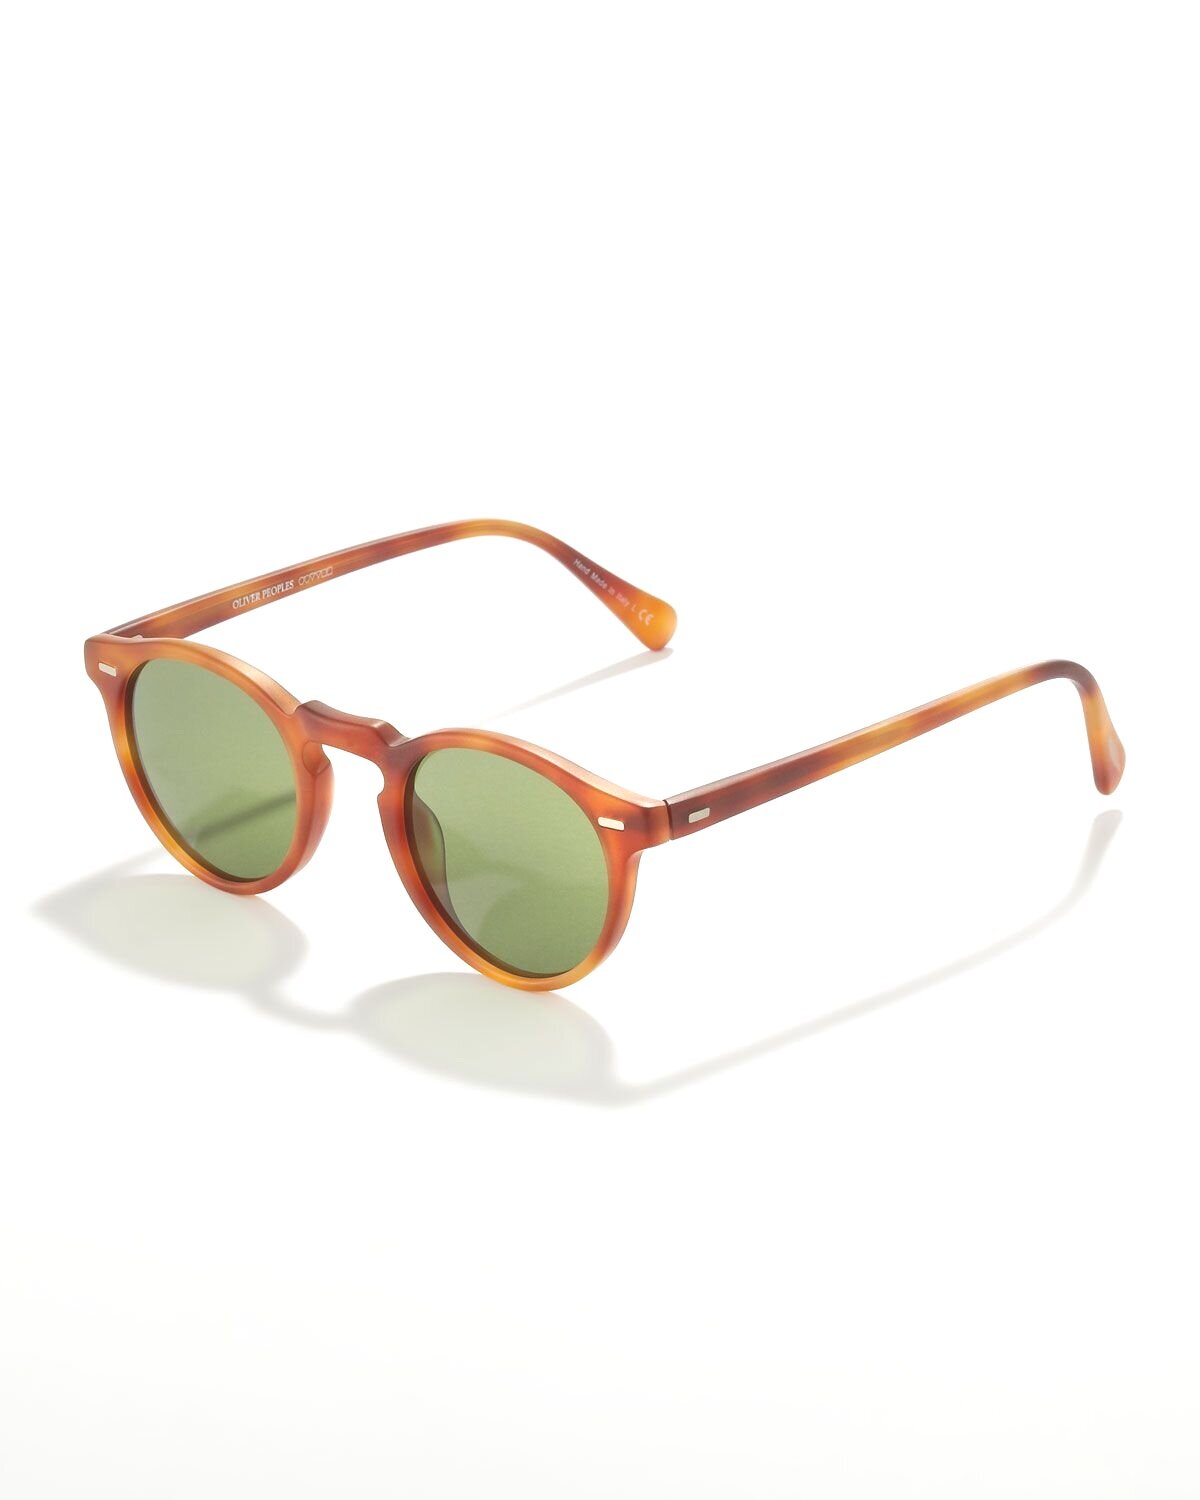 Oliver Peoples Gregory Round Sunglasses